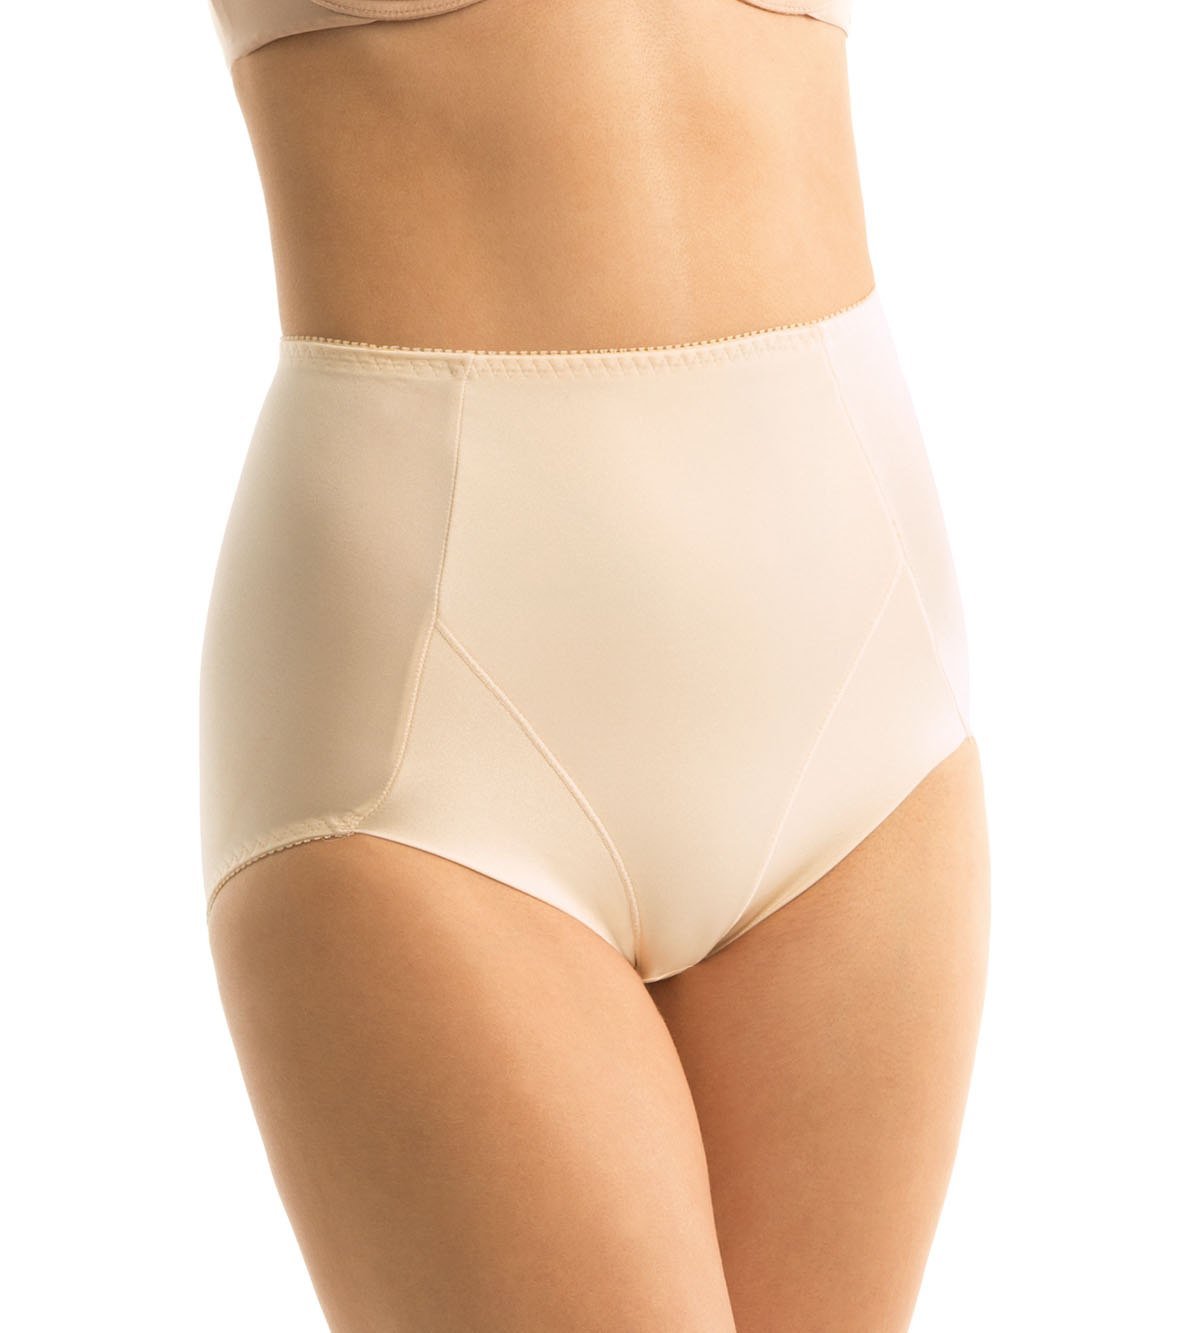 Triumph Jolly Comfort Panty 10000117 - Shapewear Fresh Powder / 12 / M  Available at Illusions Lingerie